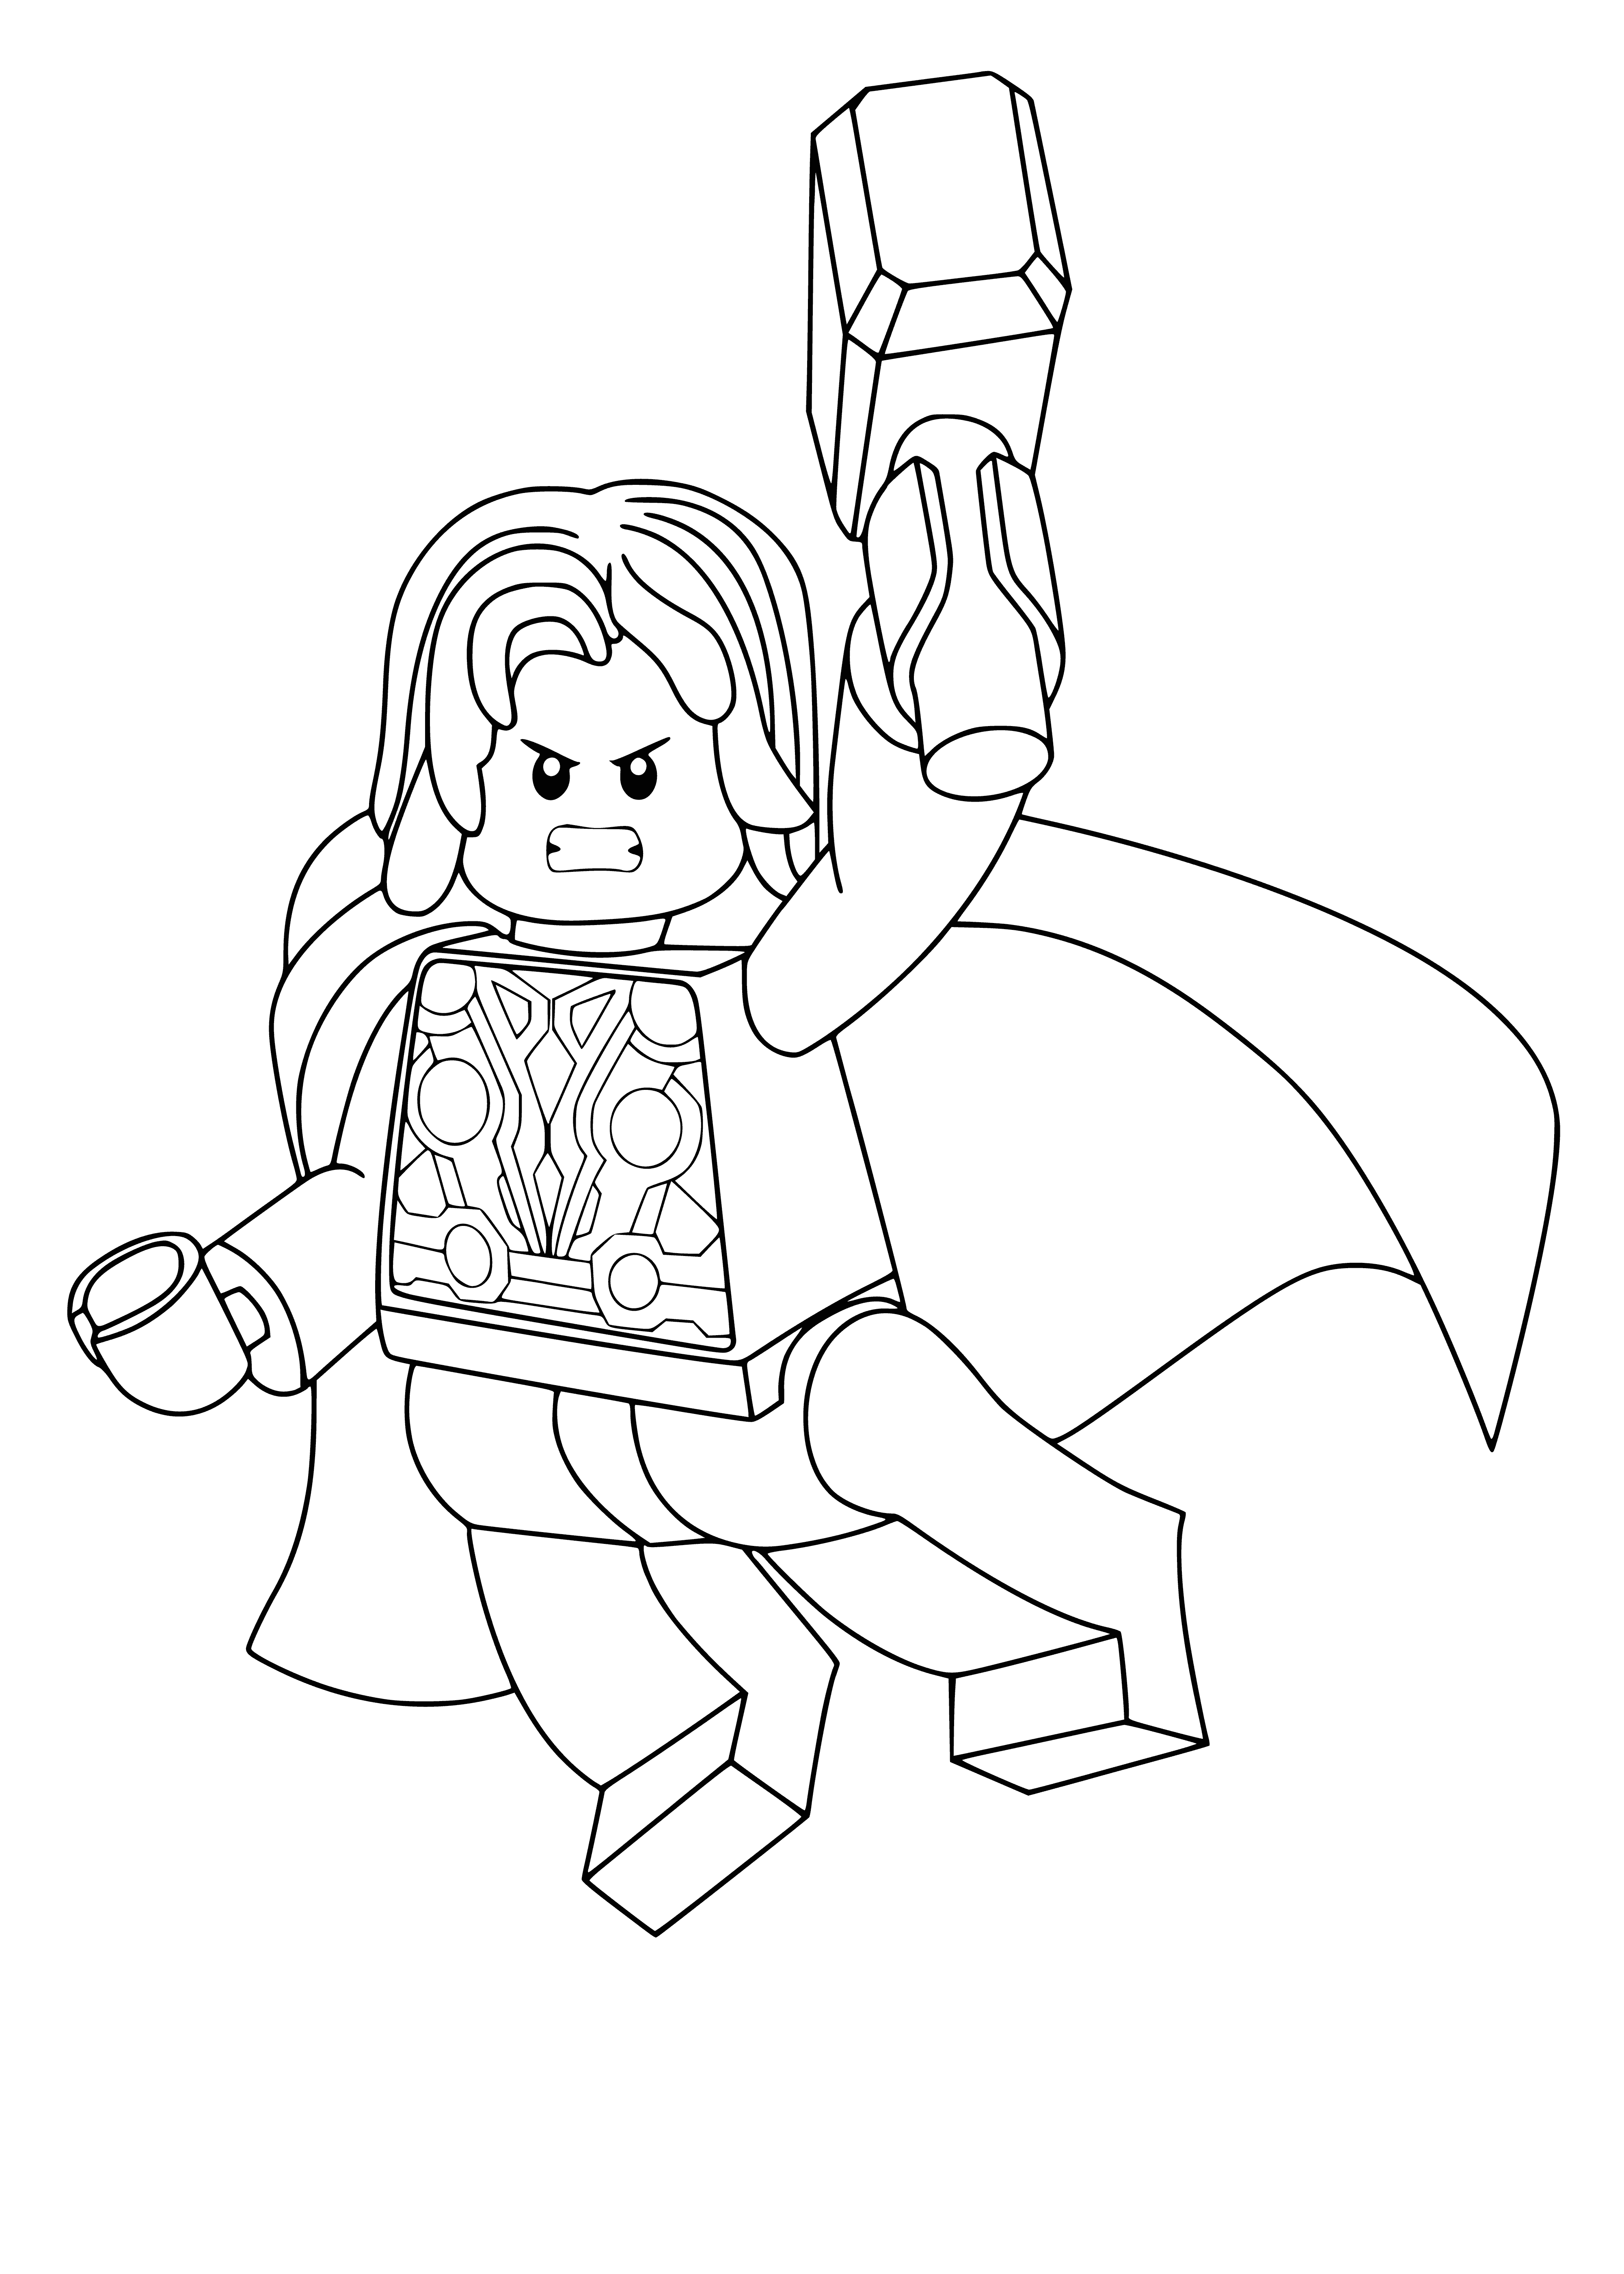 coloring page: Man strikes hammer with strength & determination, wearing blue/white cape & gold/red armor w/yellow accents.